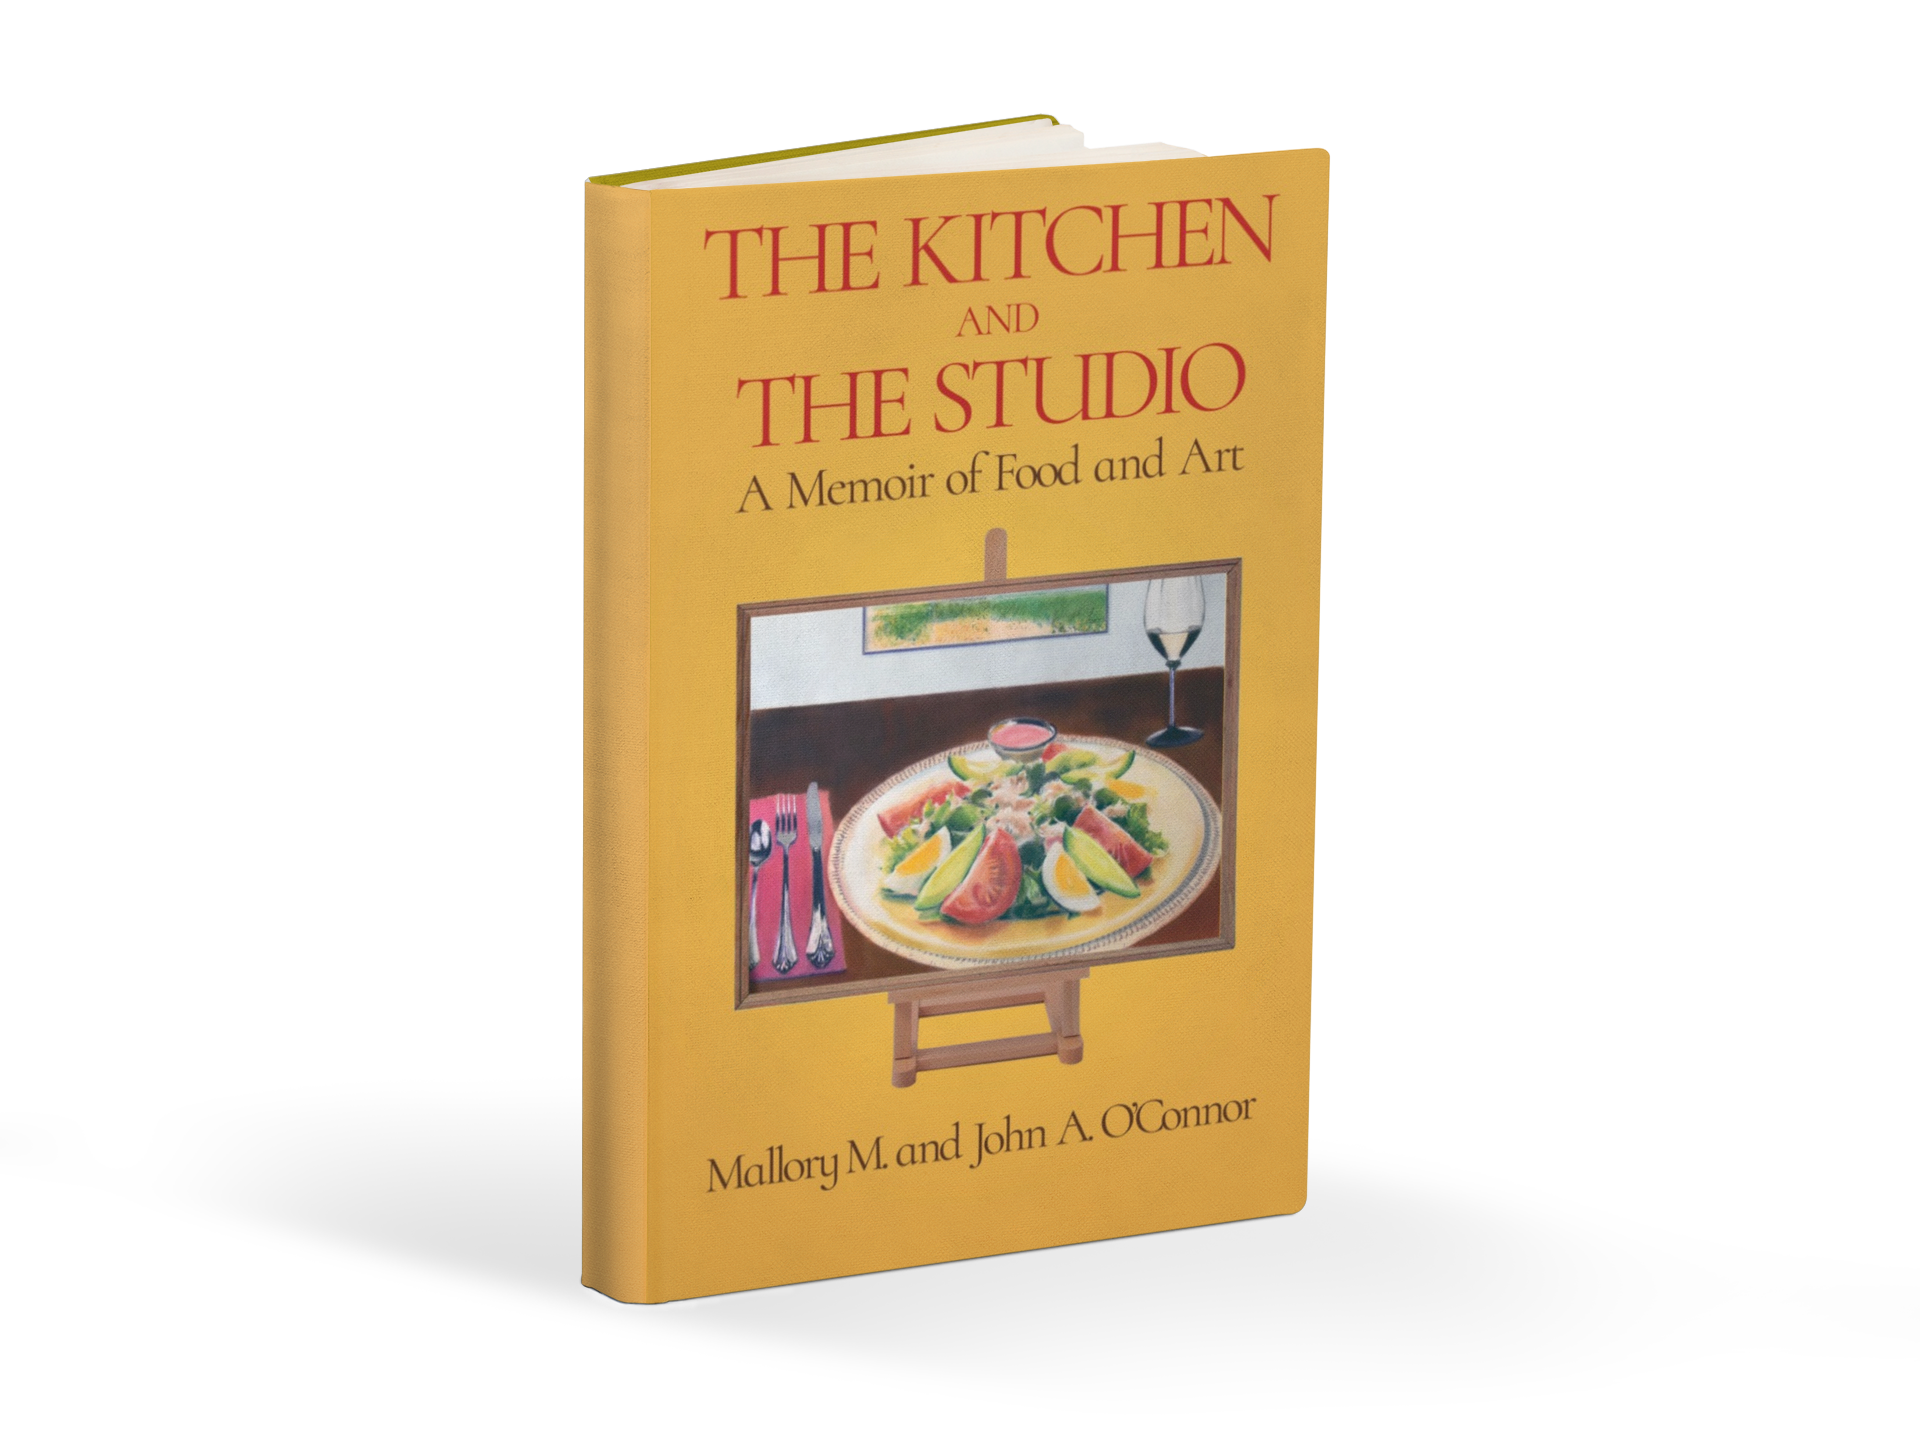 Mallory M. and John A. O'Connor Re-Invent the Traditional Cookbook with The Kitchen and the Studio